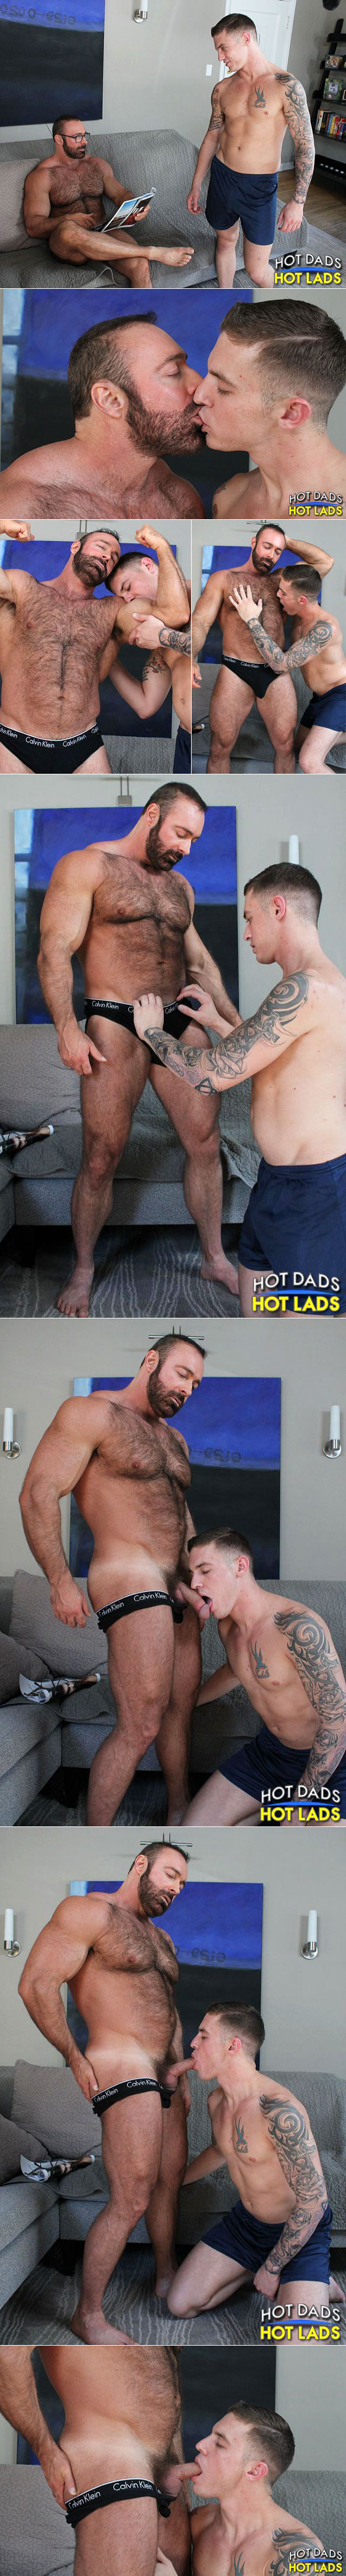 Hot Dads Hot Lads: James Ryder gets fucked by hairy muscle hunk Brad Kalvo